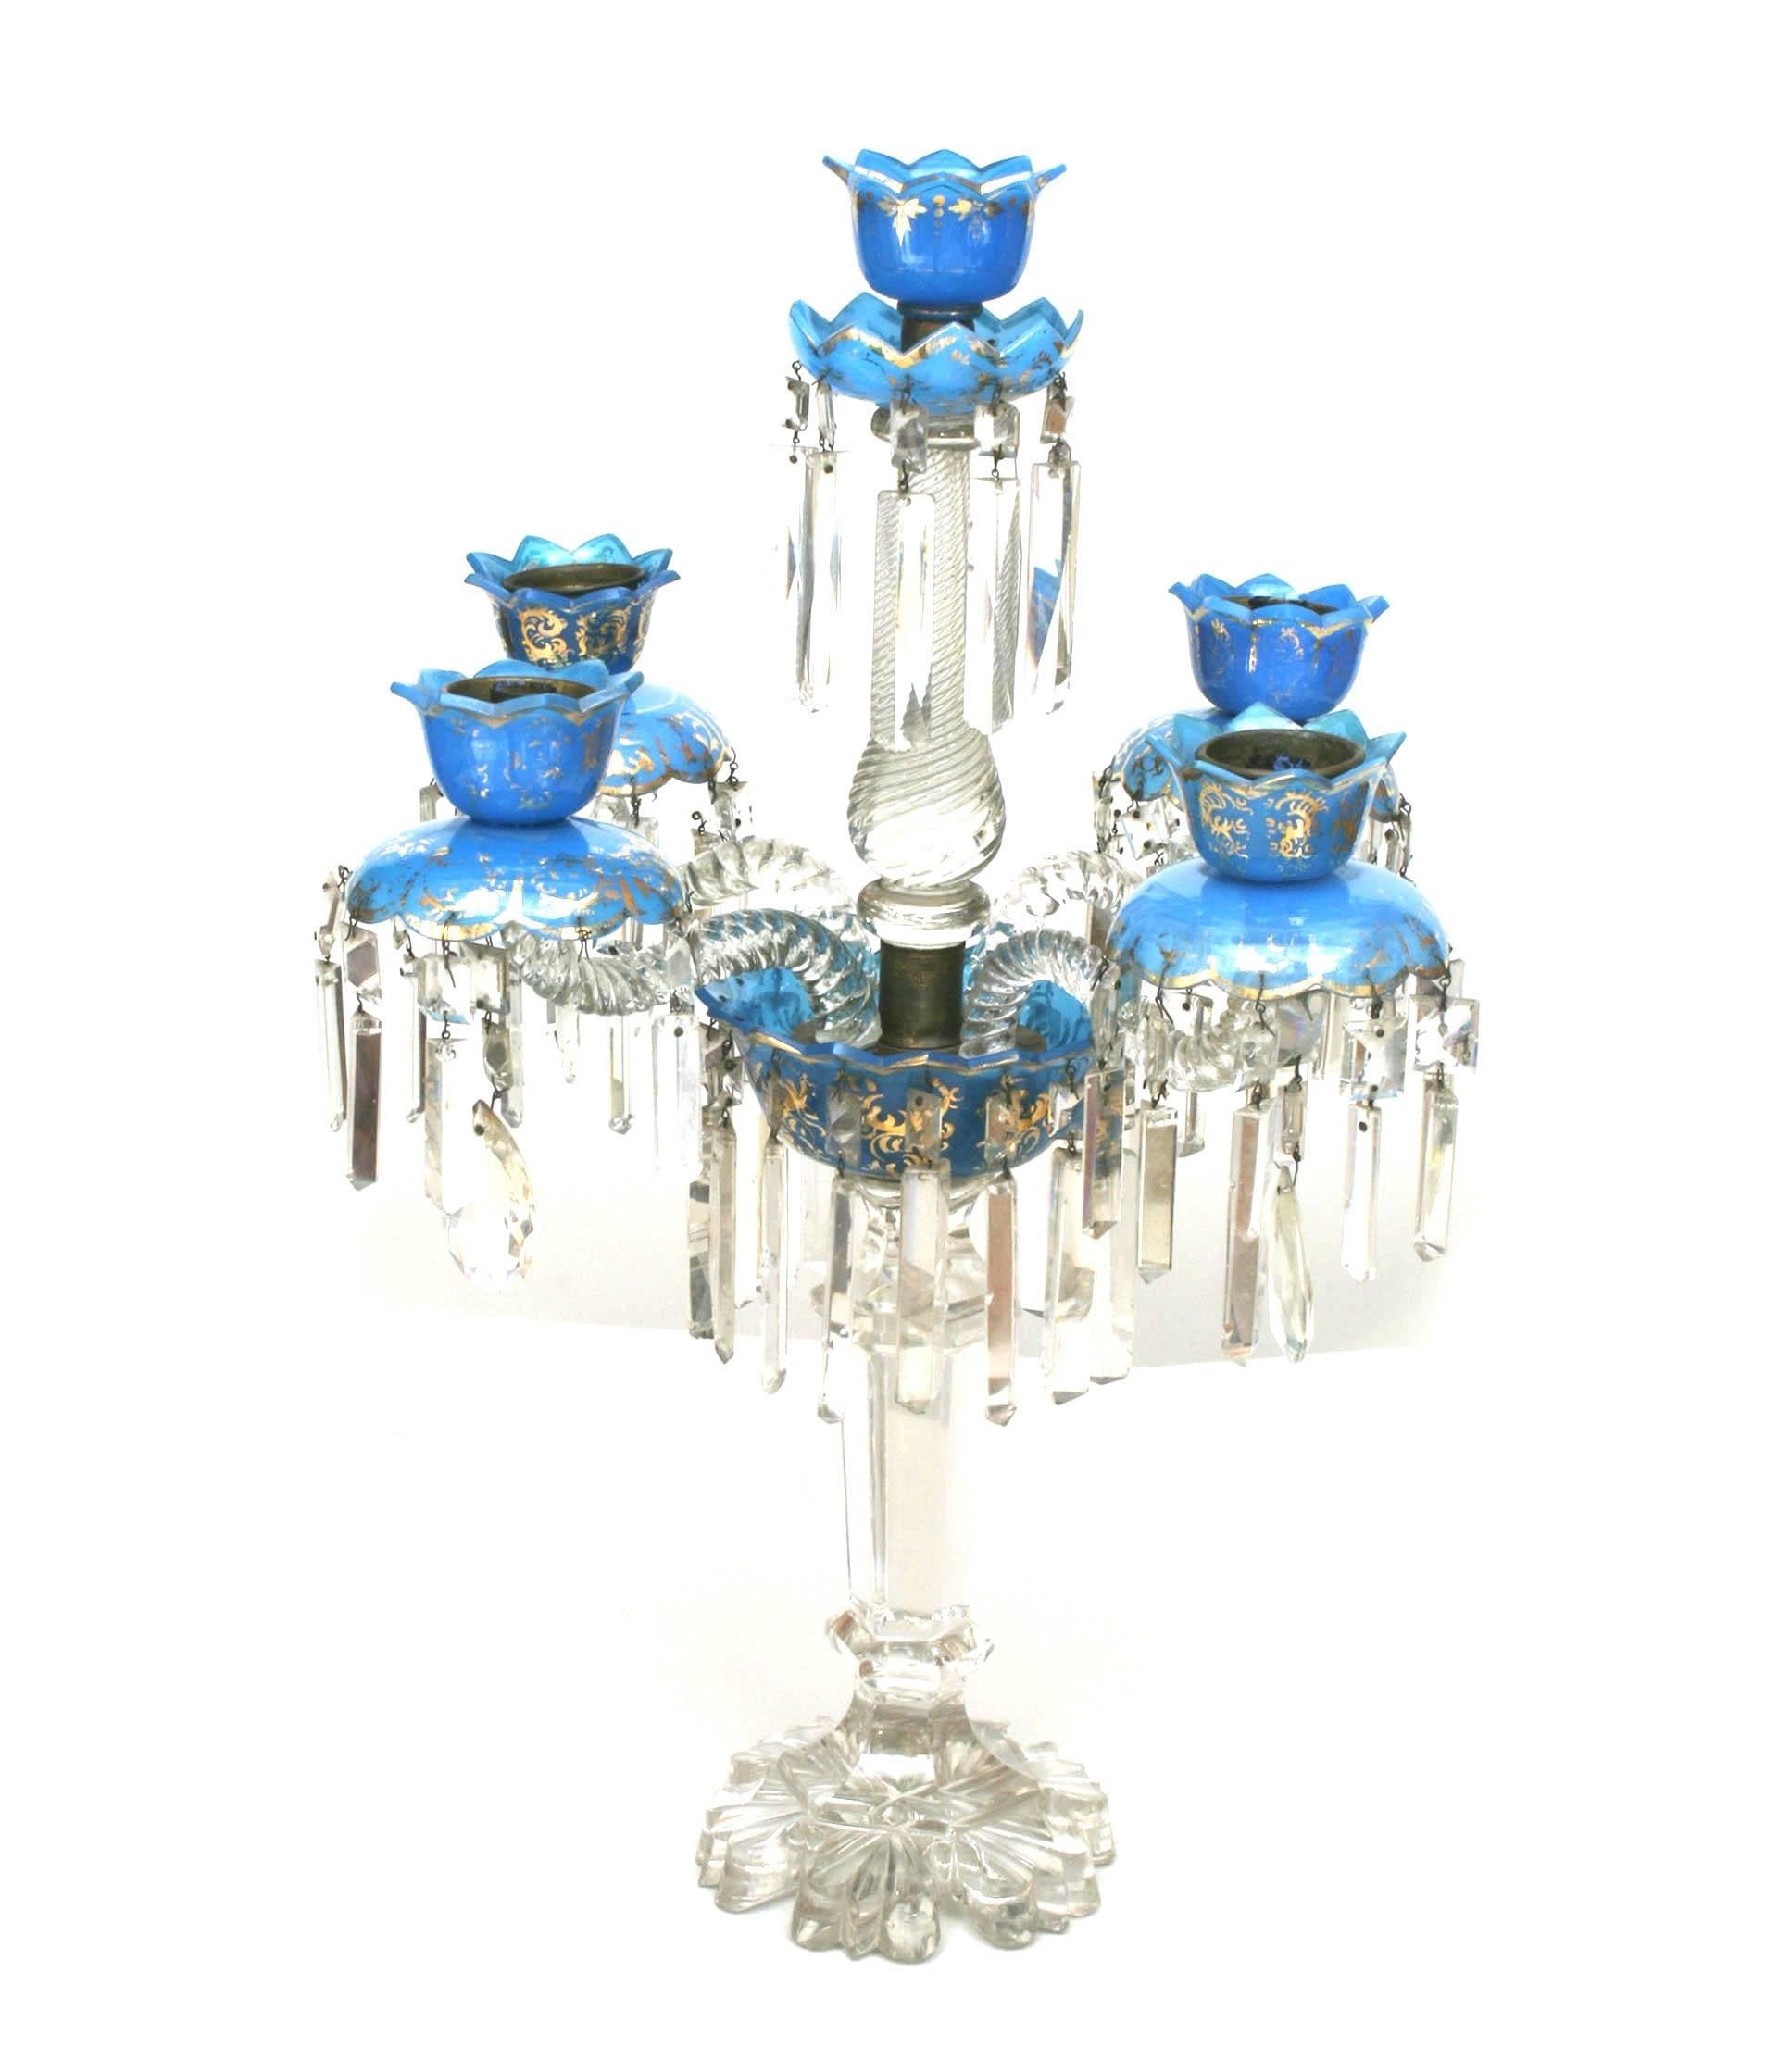 Pair of French Victorian Baccarat crystal and blue opaline 5 arm candelabras with swirl design. (PRICED AS Pair)
